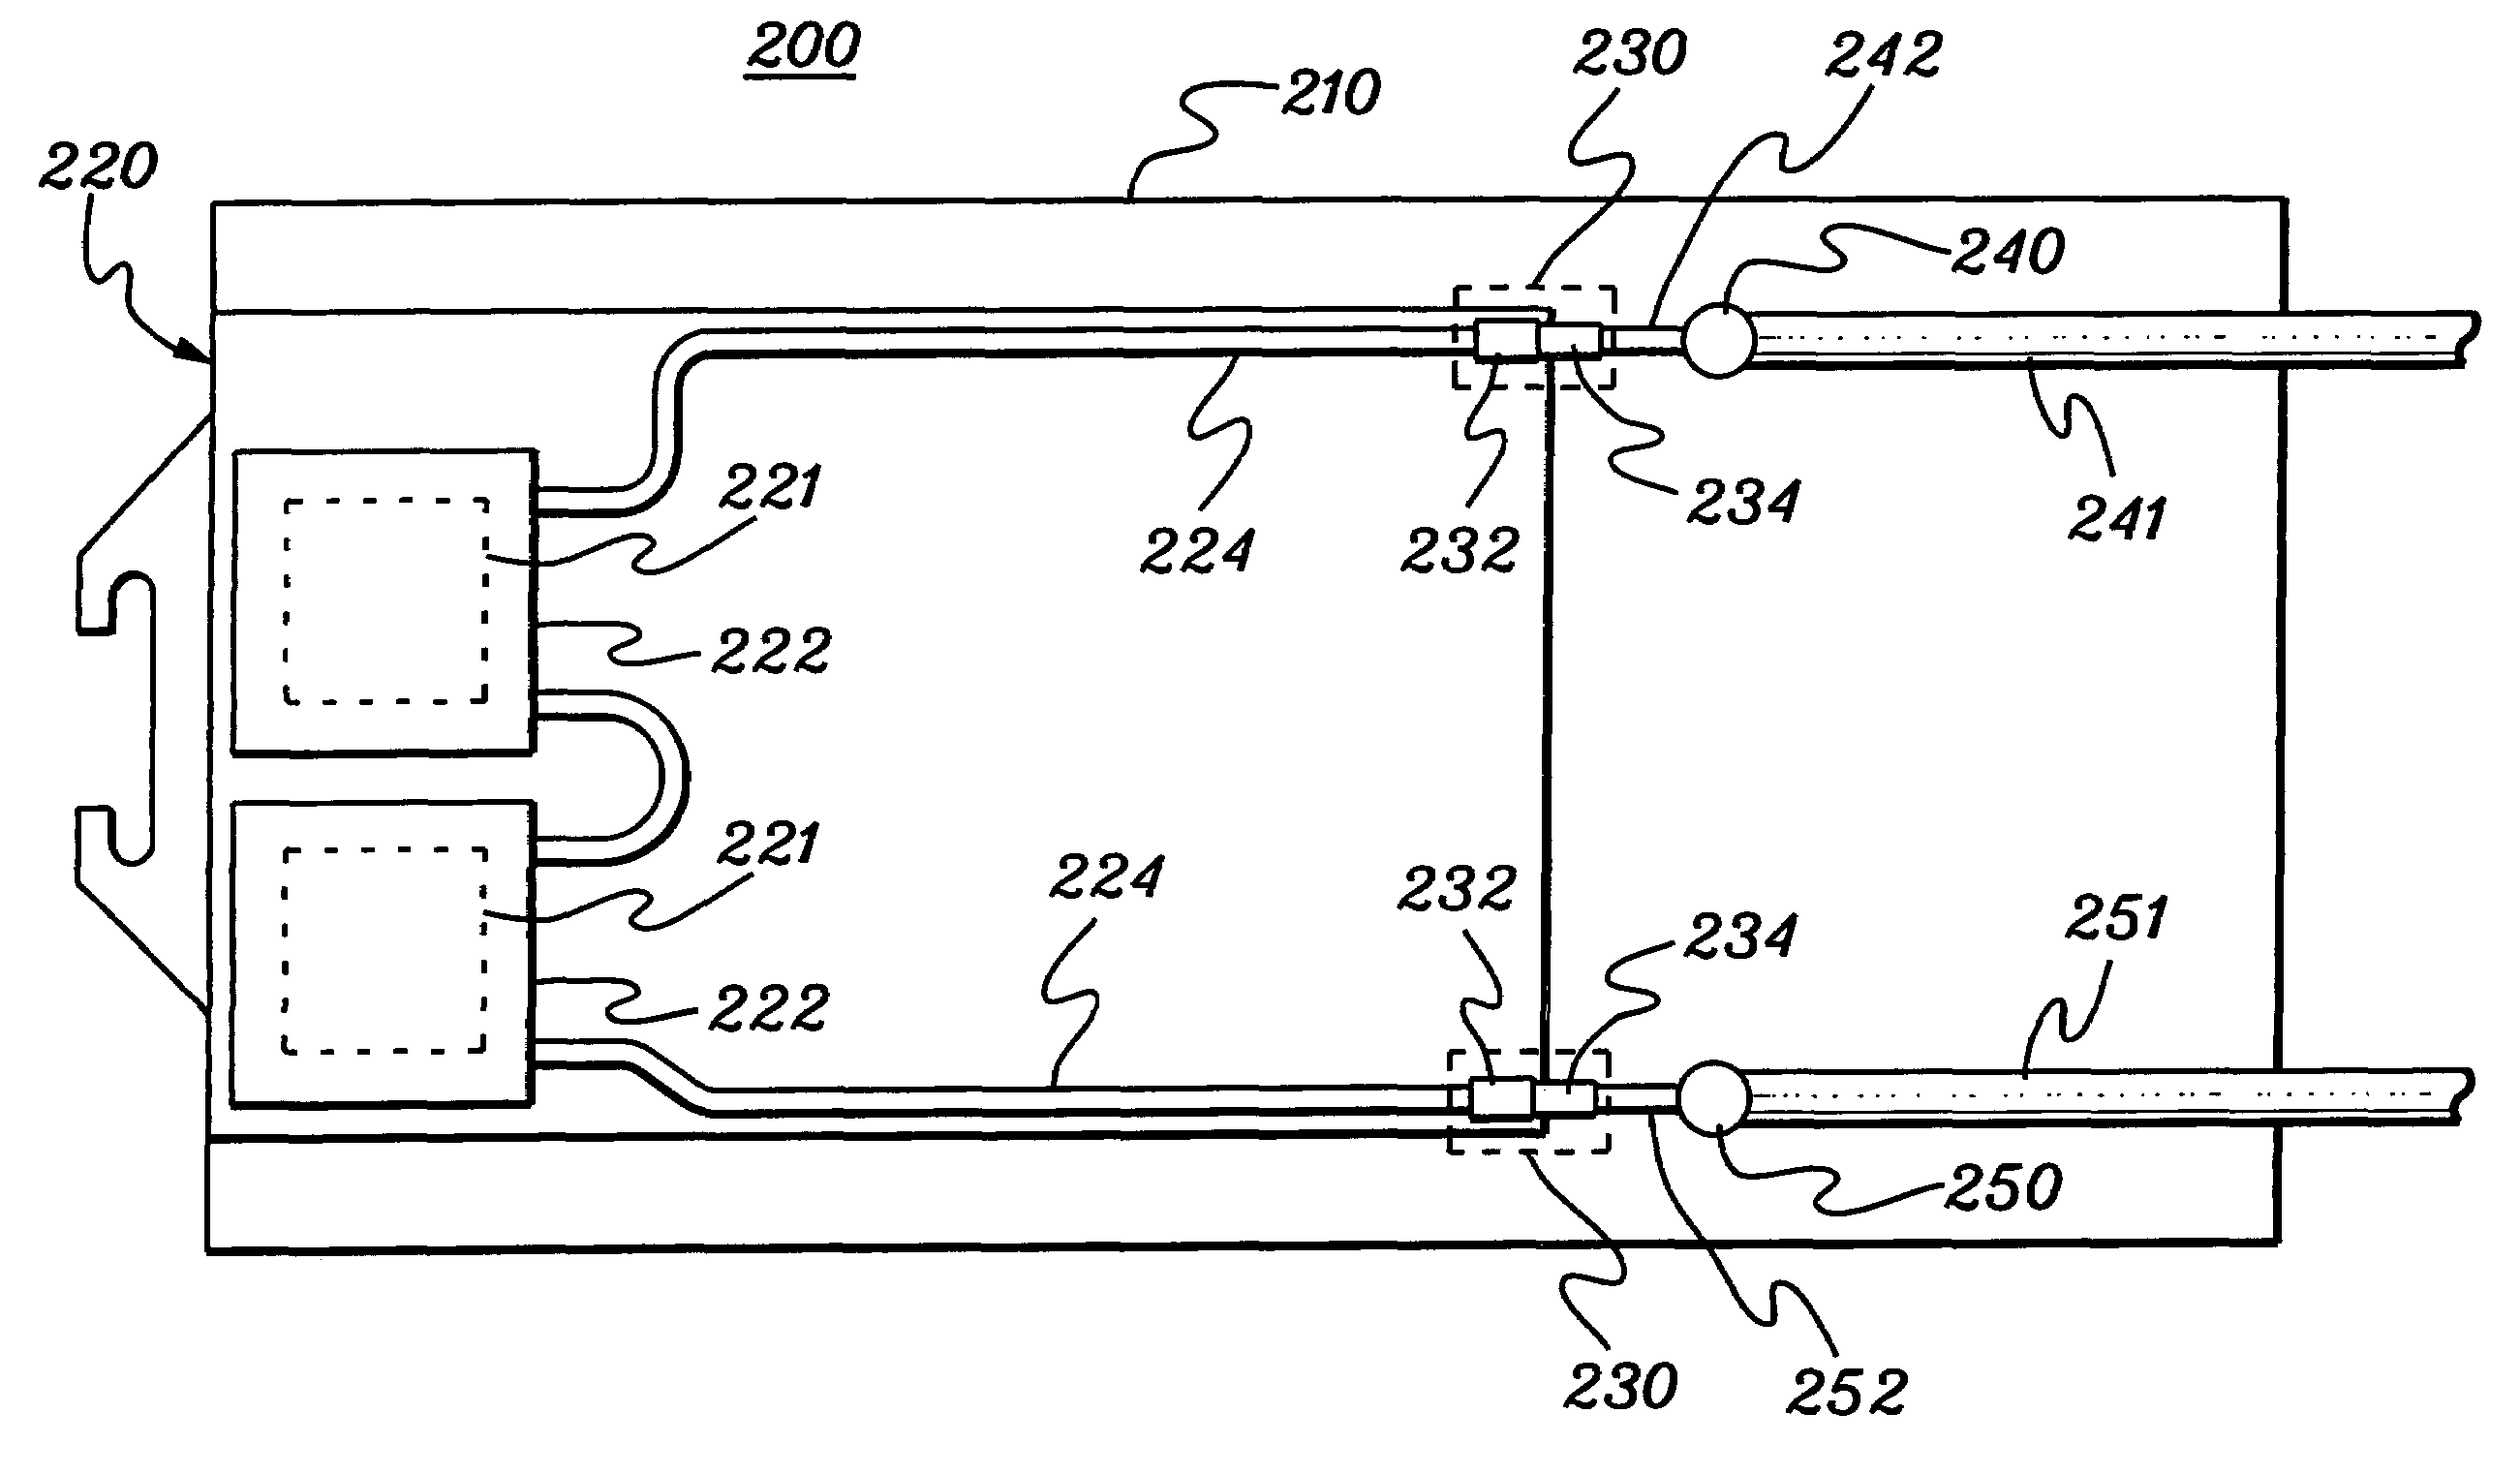 Isolation valve and coolant connect/disconnect assemblies and methods of fabrication for interfacing a liquid cooled electronics subsystem and an electronics housing